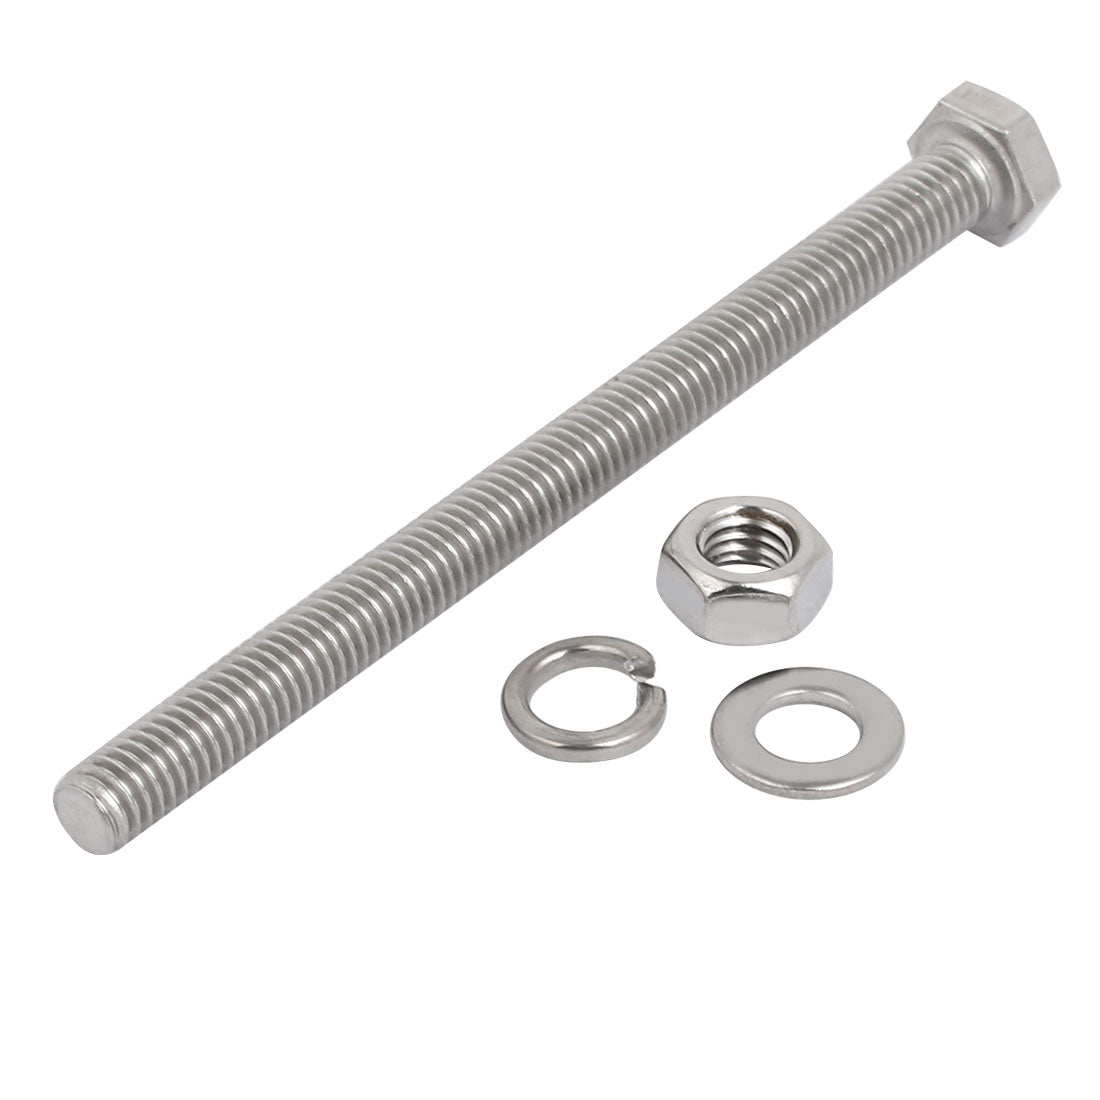 uxcell Uxcell 5pcs 304 Stainless Steel M6x90mm Hex Bolts w Nuts and Washers Assortment Kit